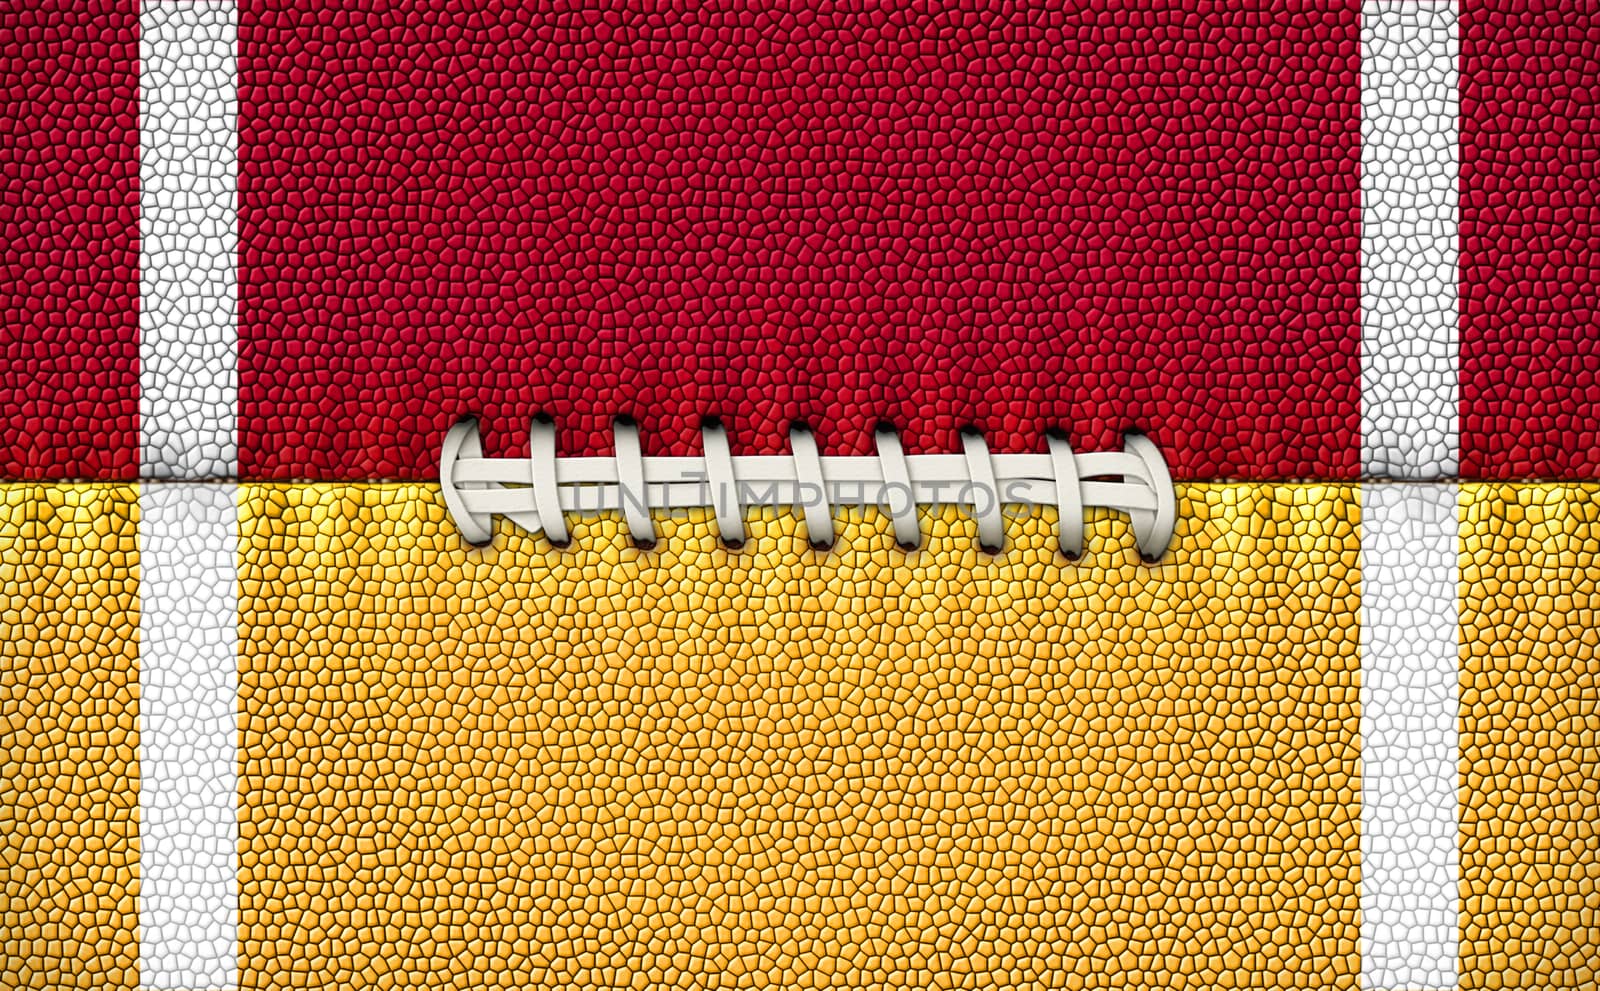 Digital Illustration of a footballÕs texture, laces, and stripes to use as a background for text or other graphics.       